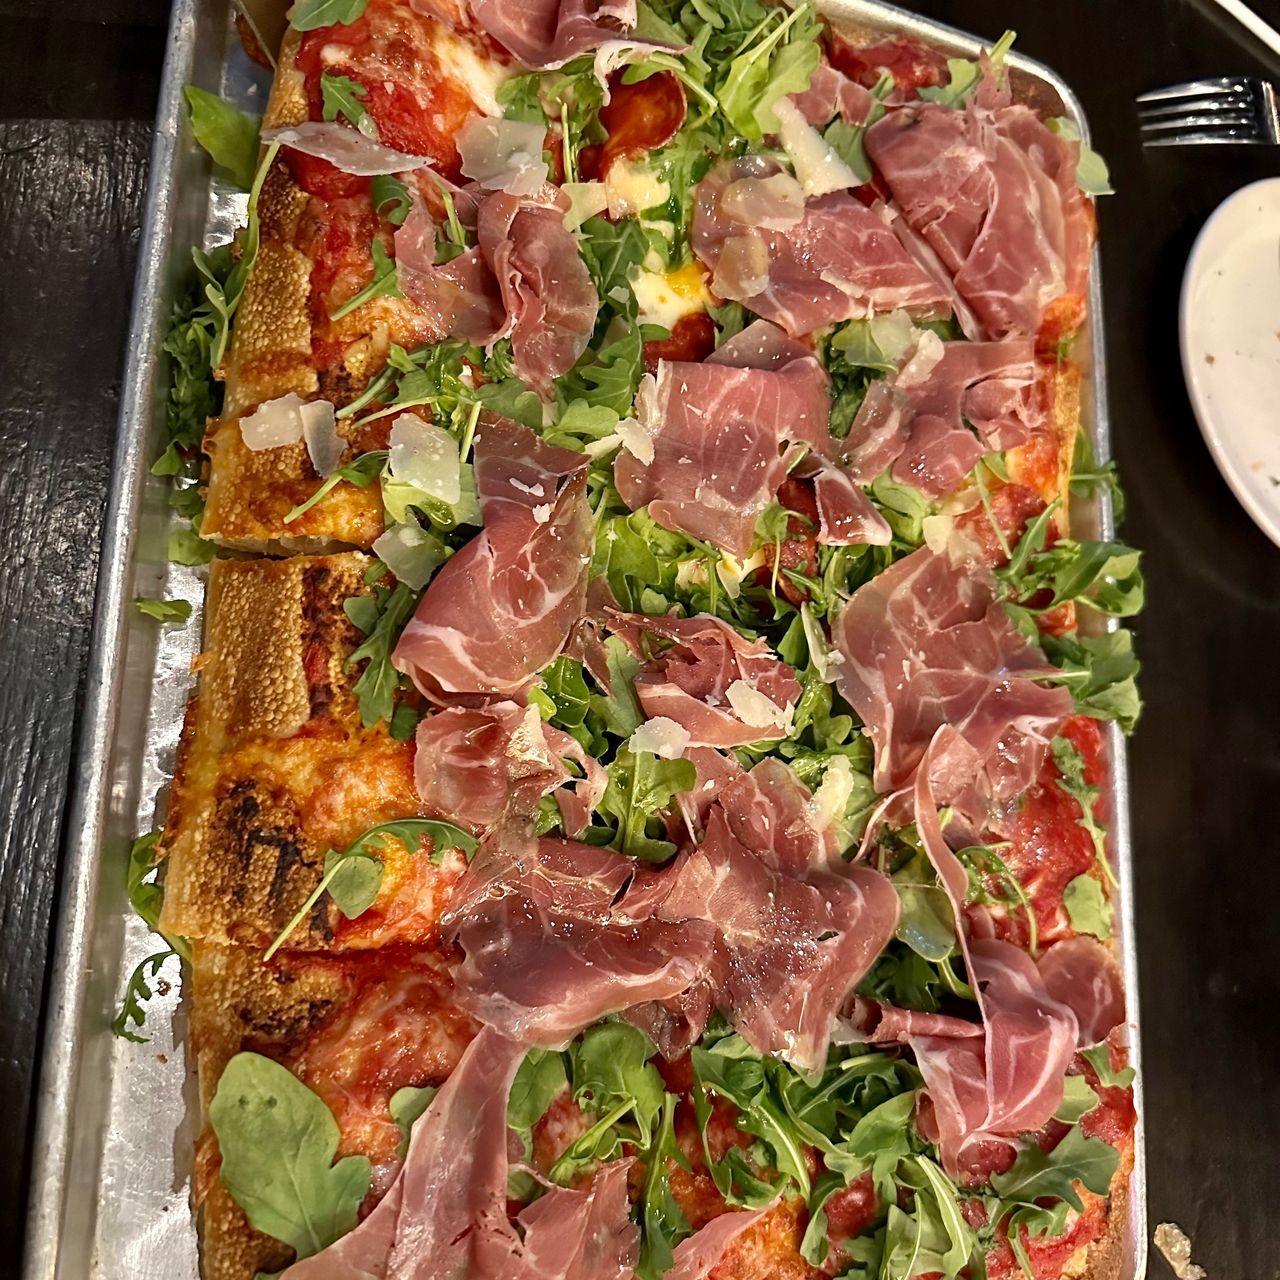 Pizza Rock Las Vegas – Gourmet pizzas, hand-crafted artisan cocktails, over  30 craft beers, wine and more!